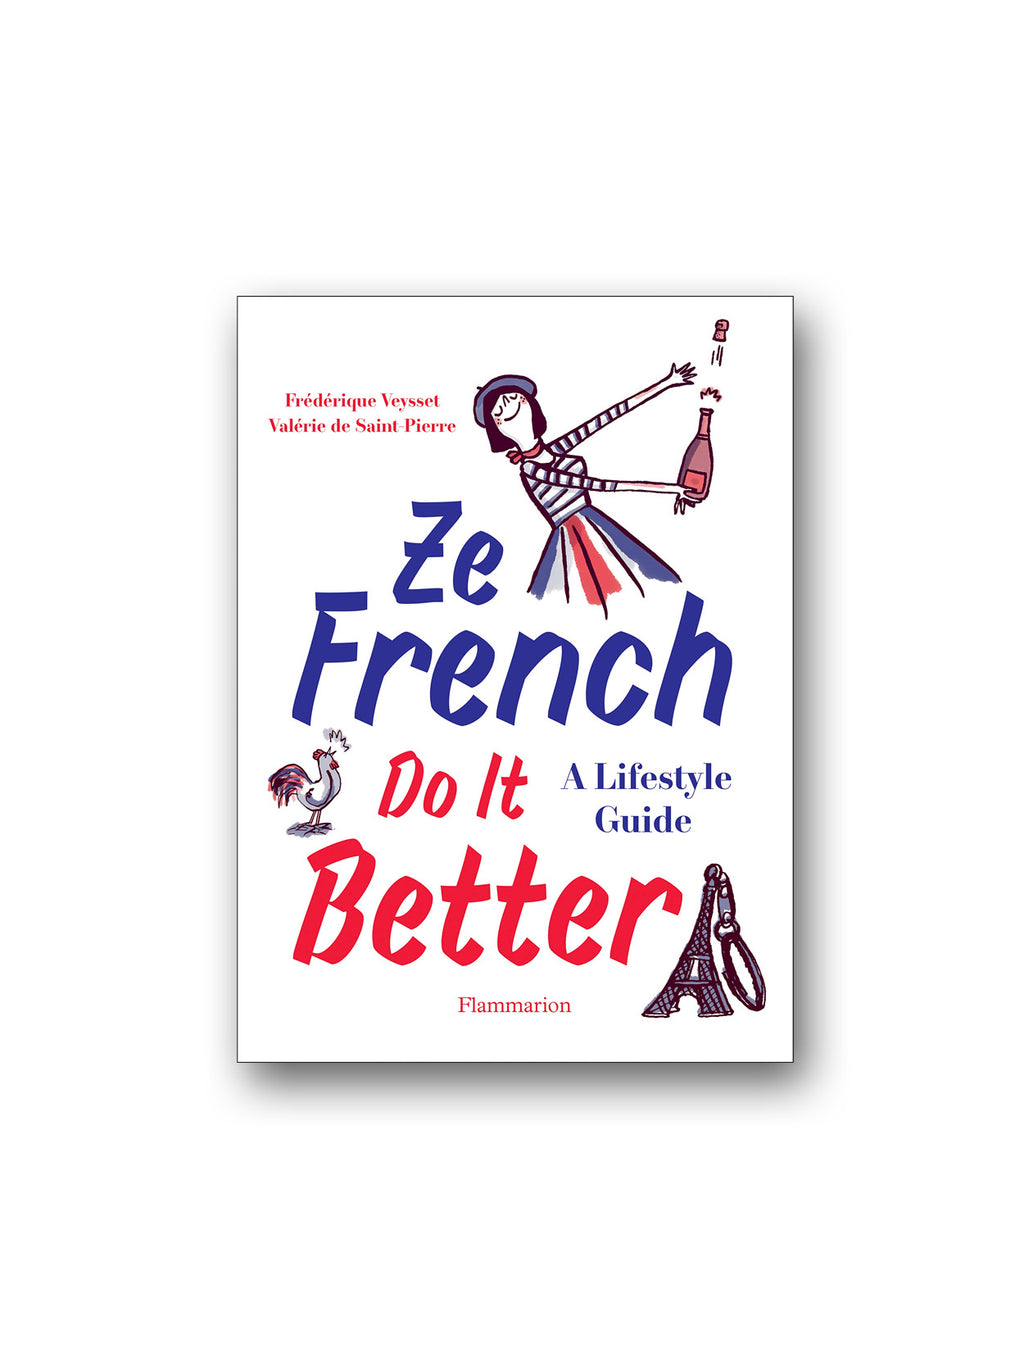 Ze French Do it Better